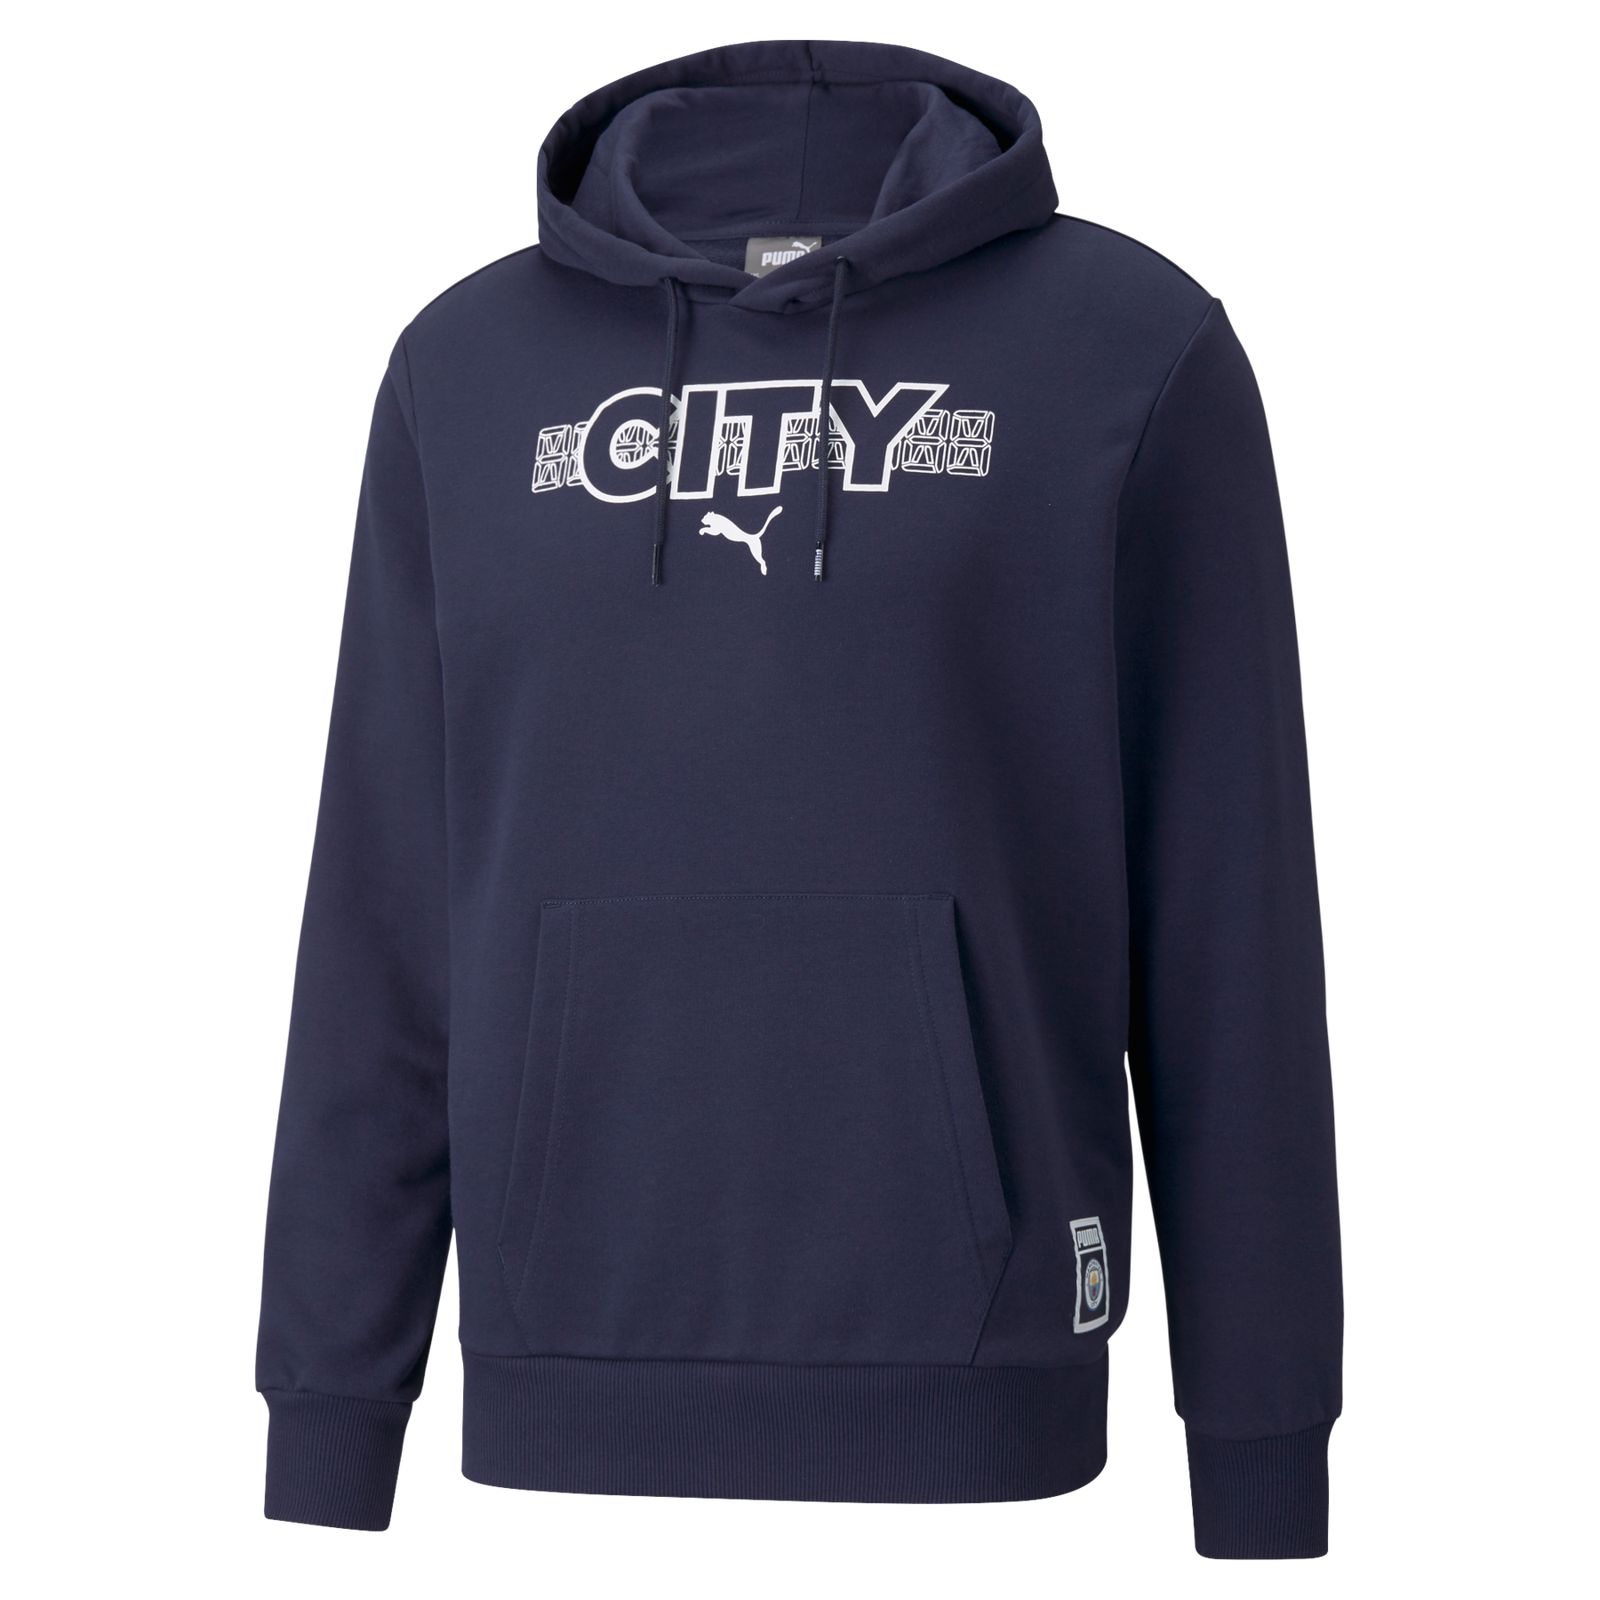 Manchester City FtblCore Hoodie | Official Man City Store